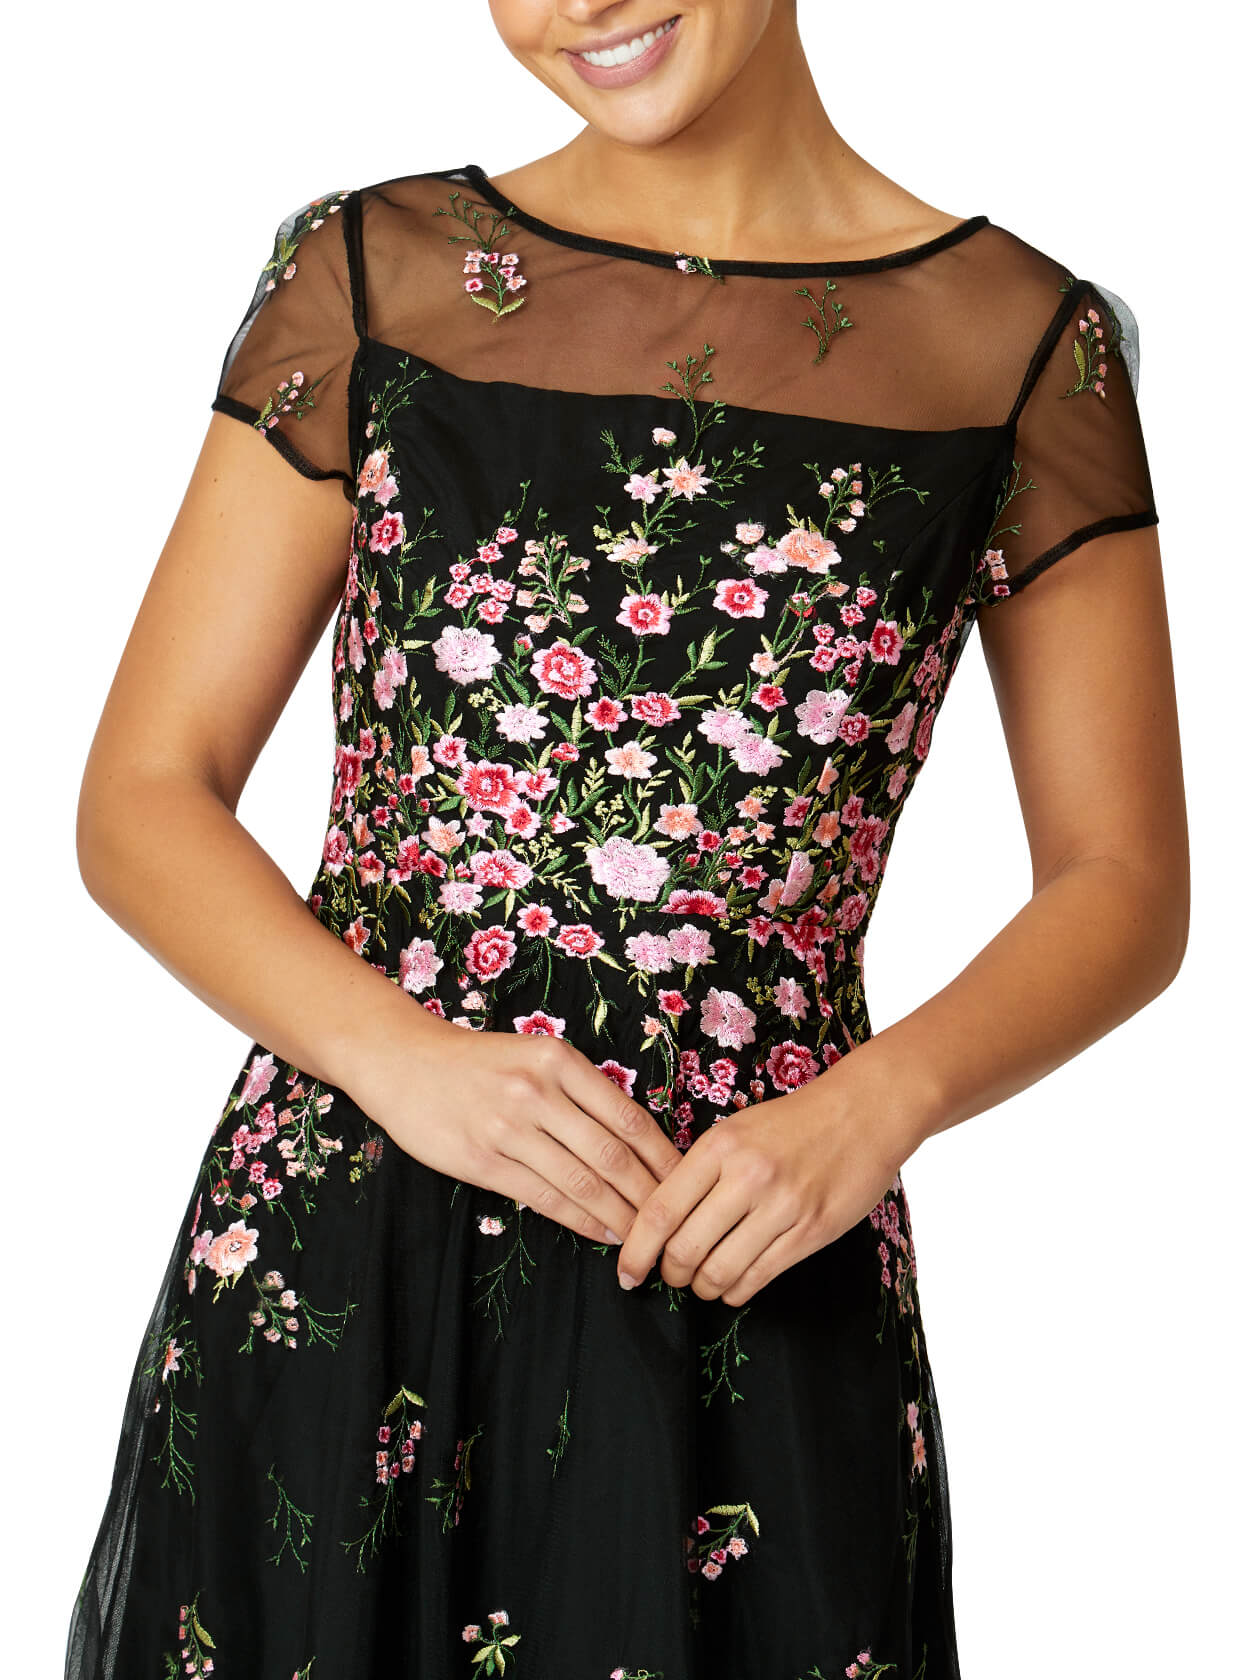 Maria Floral Dress in Pink and Black